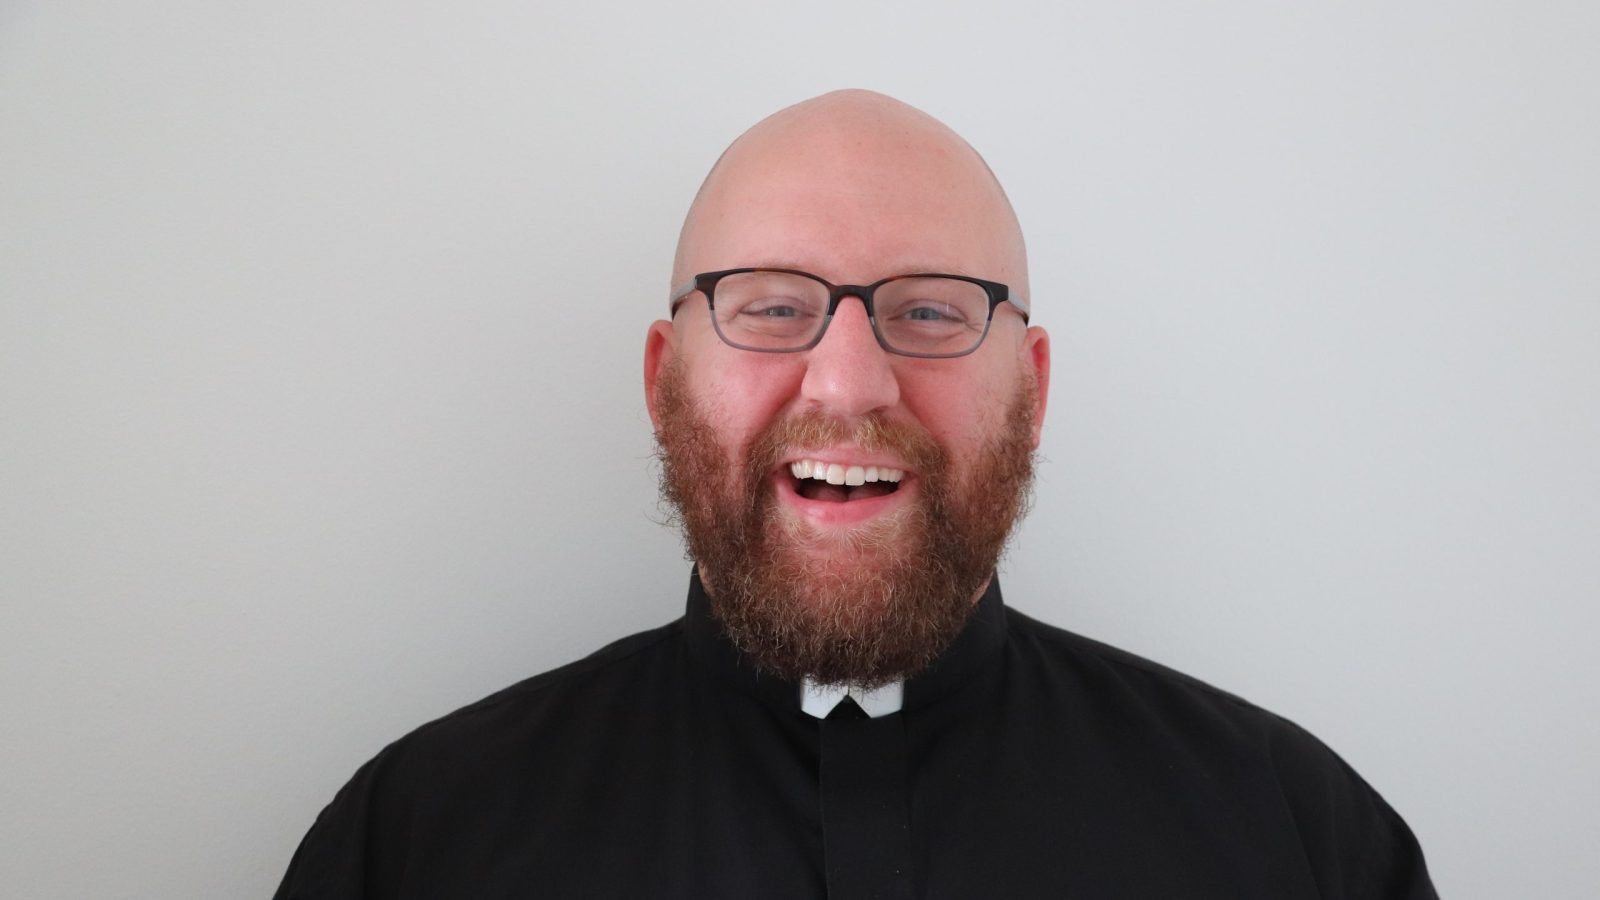 A headshot of Ken Homan (G'25) who is wearing glasses and is dressed in black with a white collar. Ken is a Jesuit brother and part of the Society of Jesus.